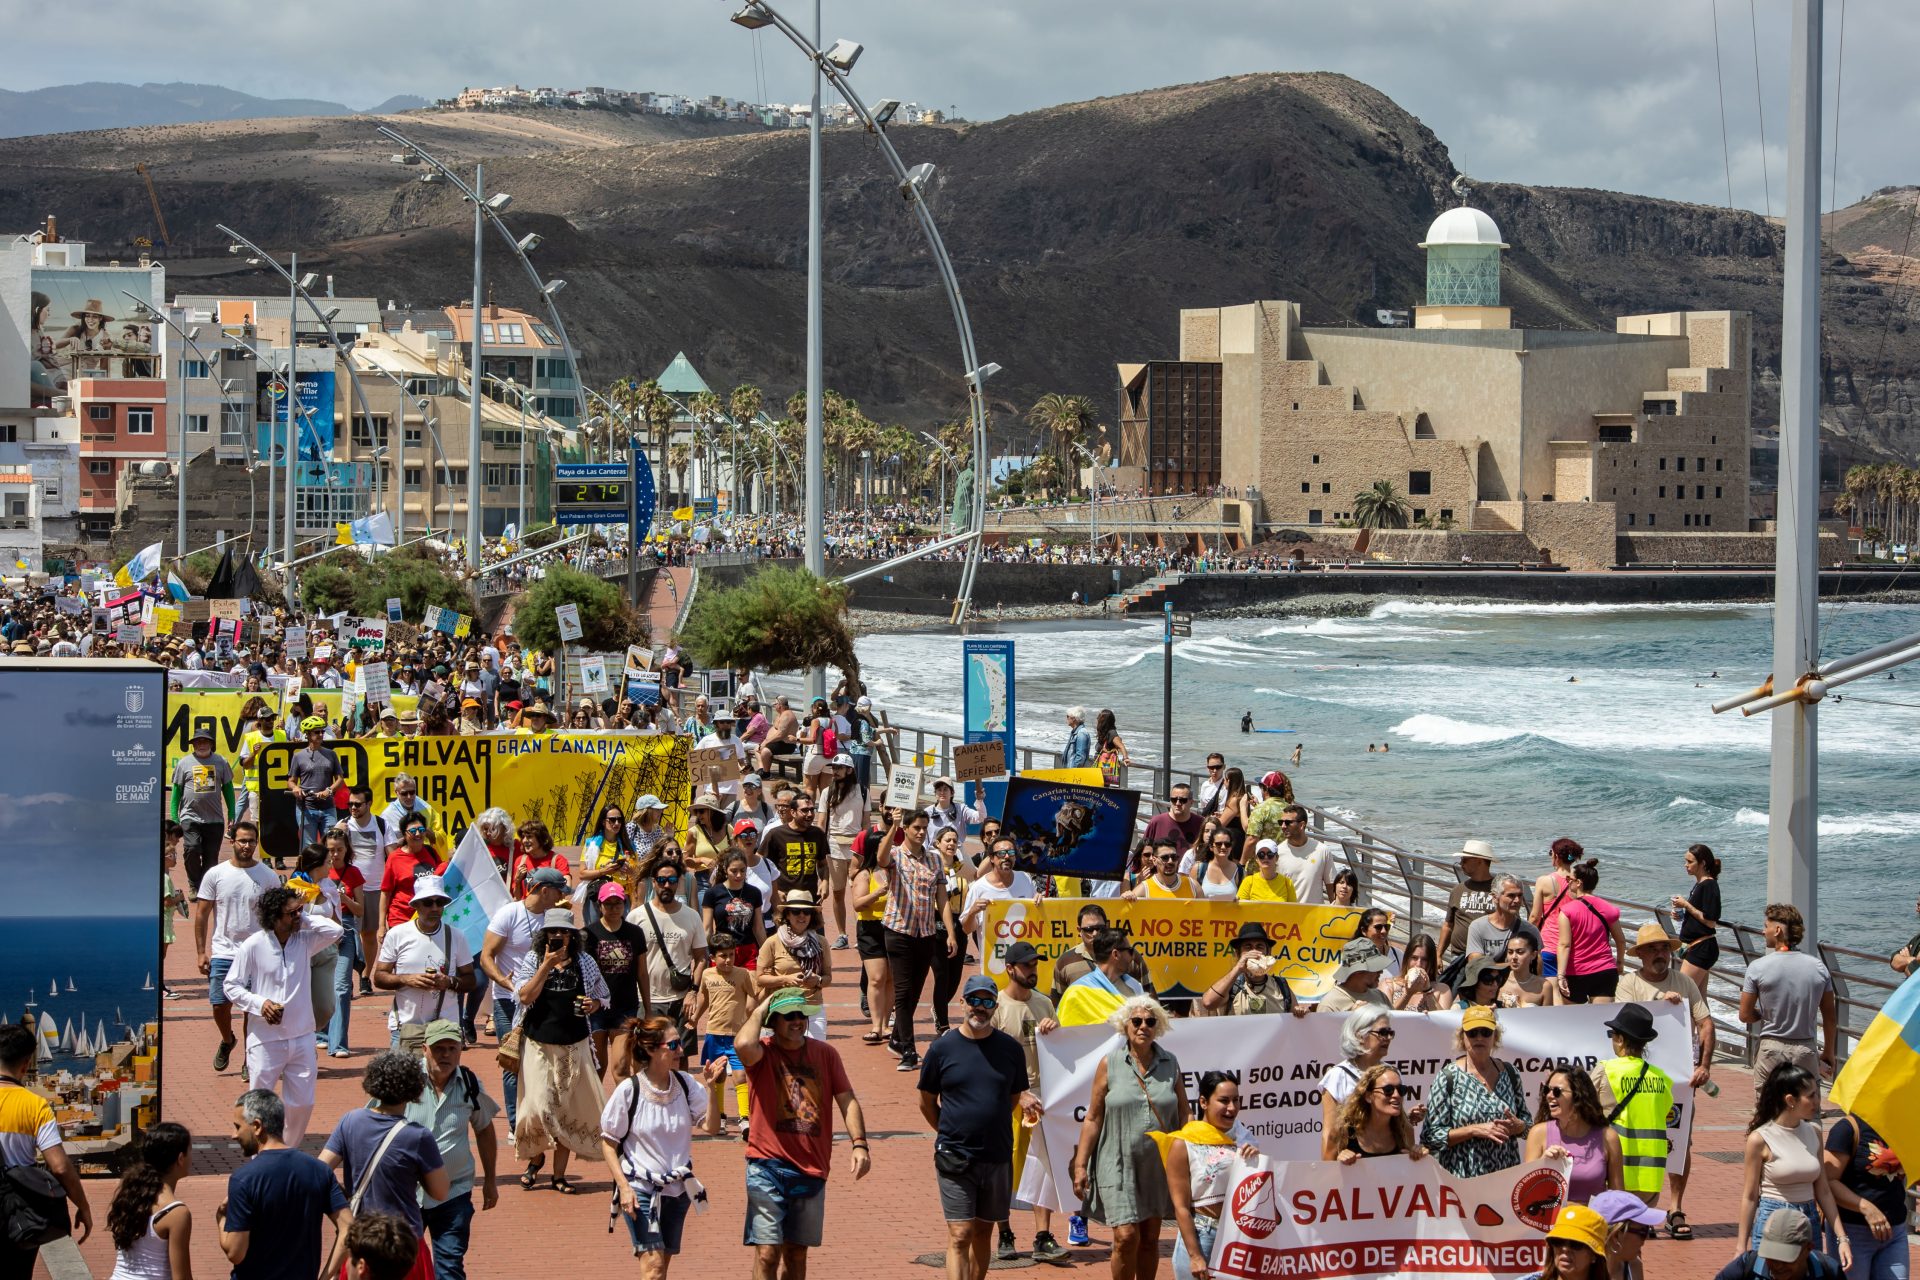 Big protest in the Canary Islands